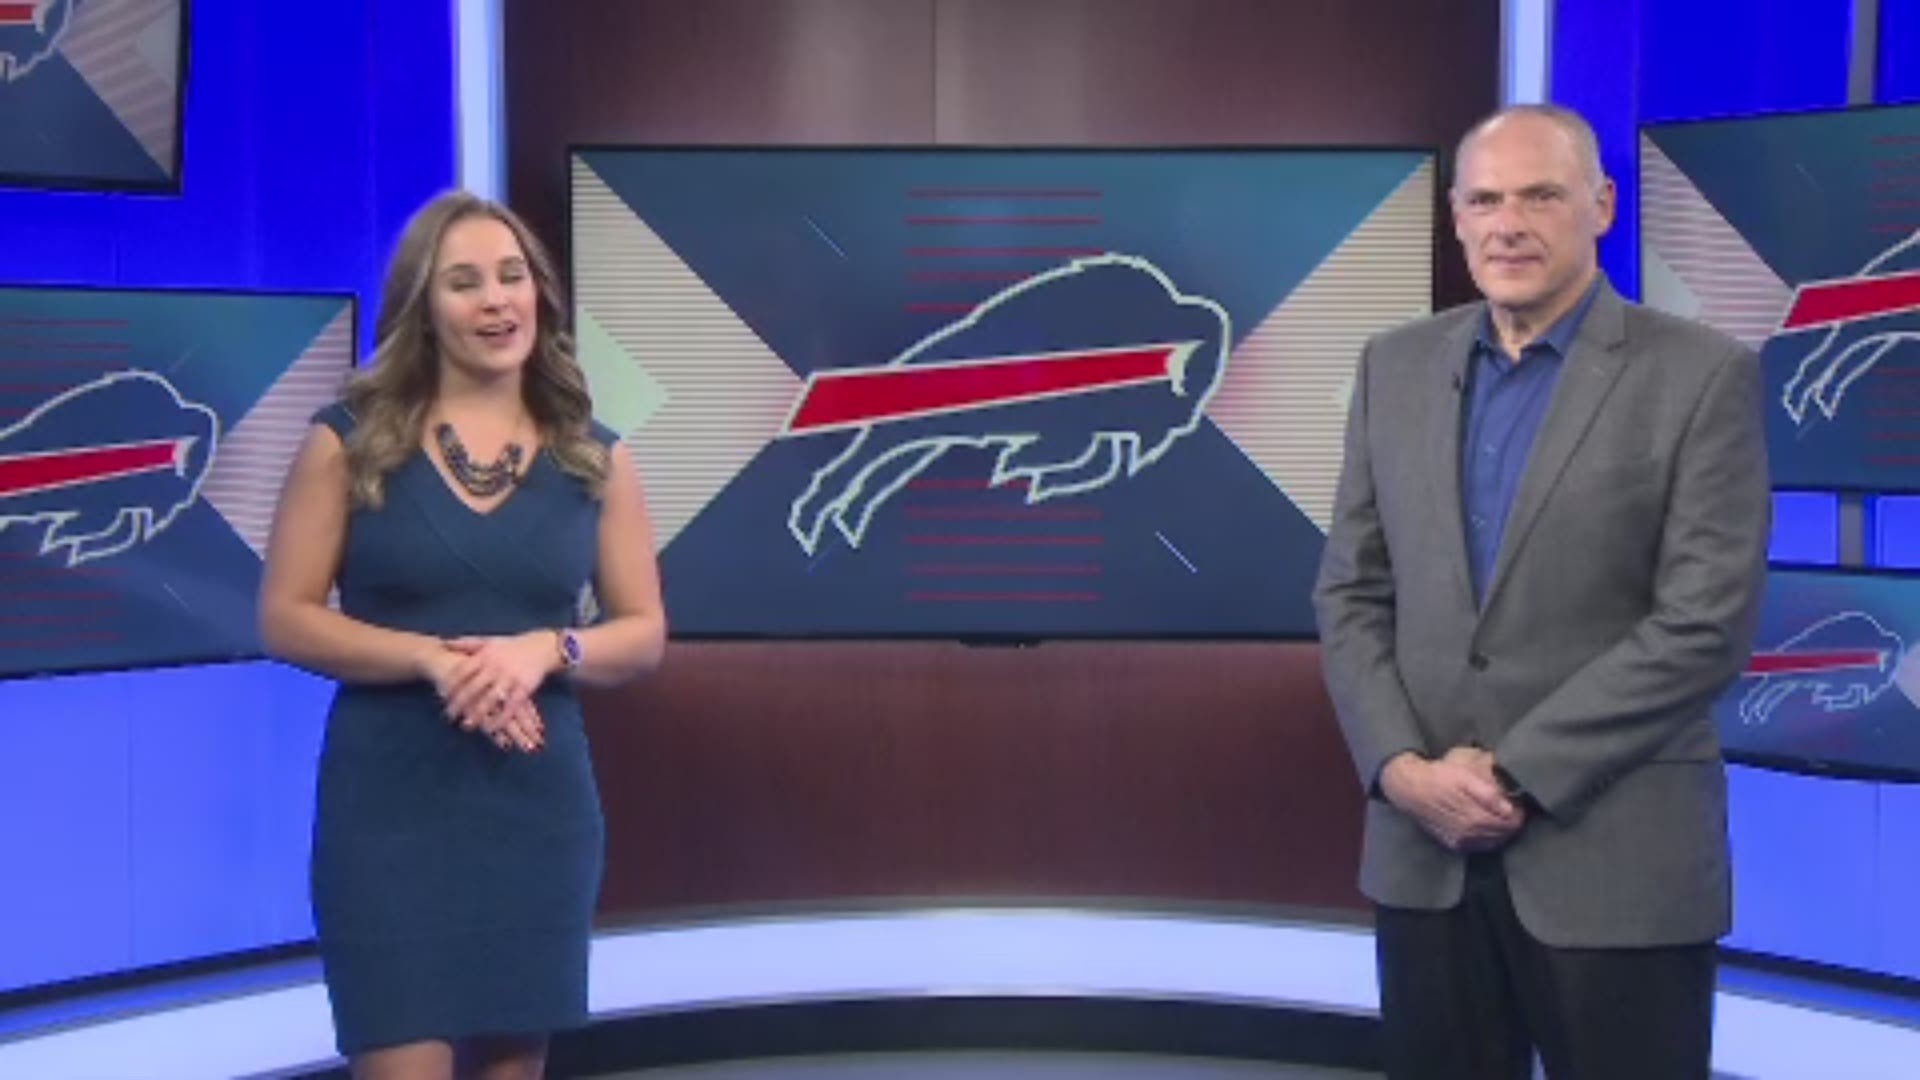 Hosting Miami is a great opportunity for Josh Allen to have a breakout game. Heather Prusak & Vic Carucci discuss guys looking to make a statement vs the Dolphins.